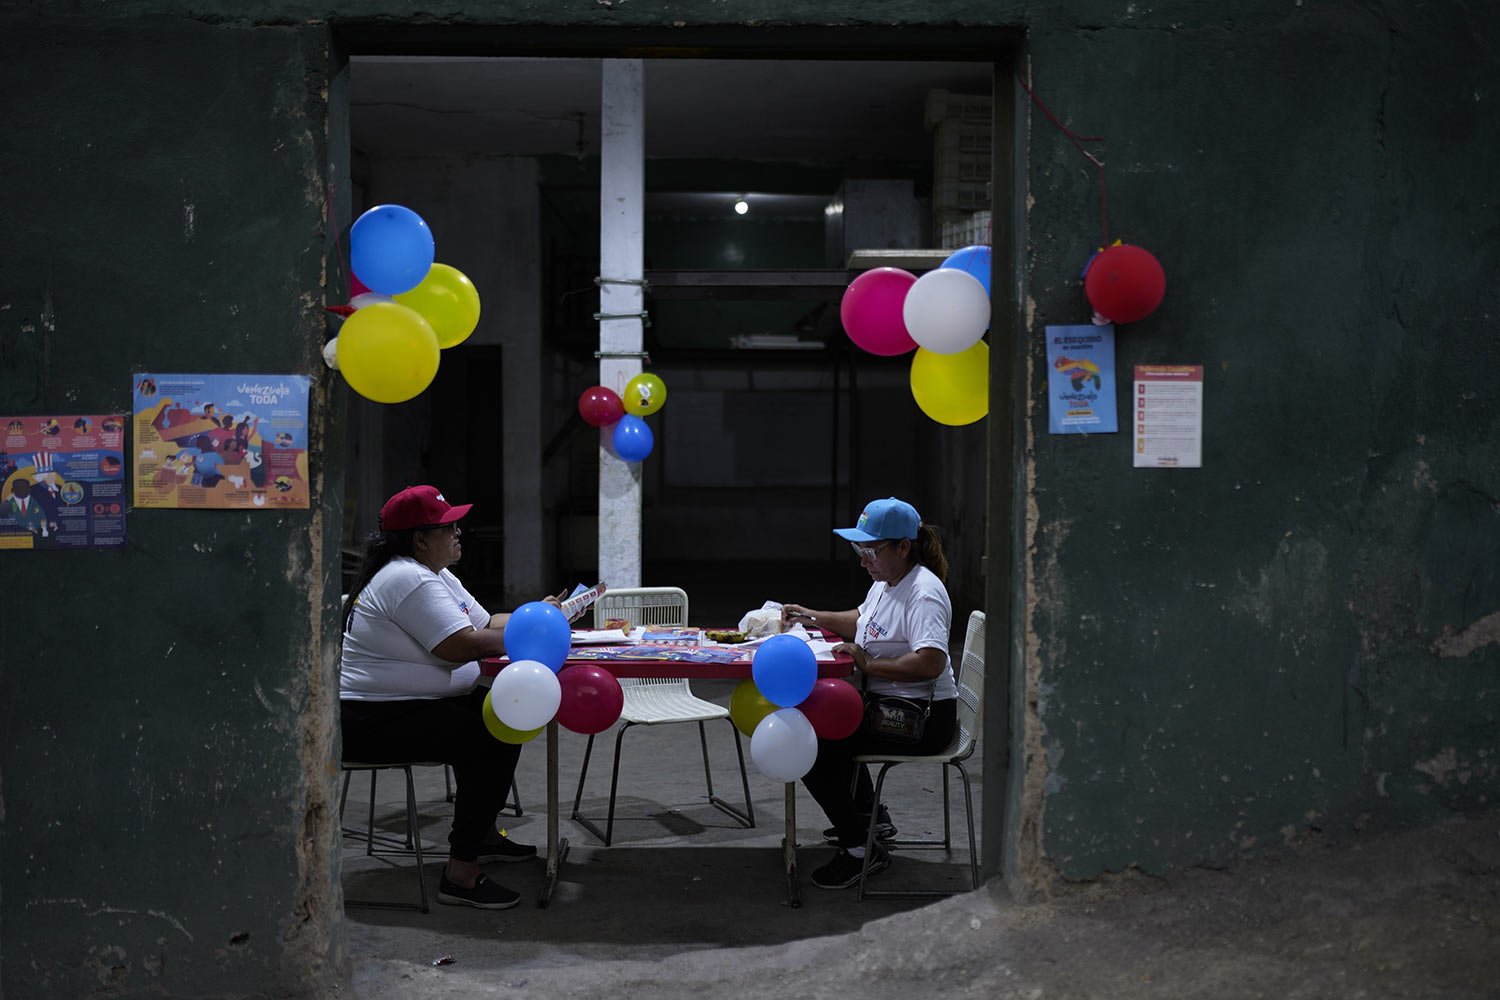  Ruling party community leaders sort election material on the Essequibo region, during a referendum on the future of the disputed territory with Guyana, in Caracas, Venezuela, Dec. 3, 2023. (AP Photo/Ariana Cubillos) 